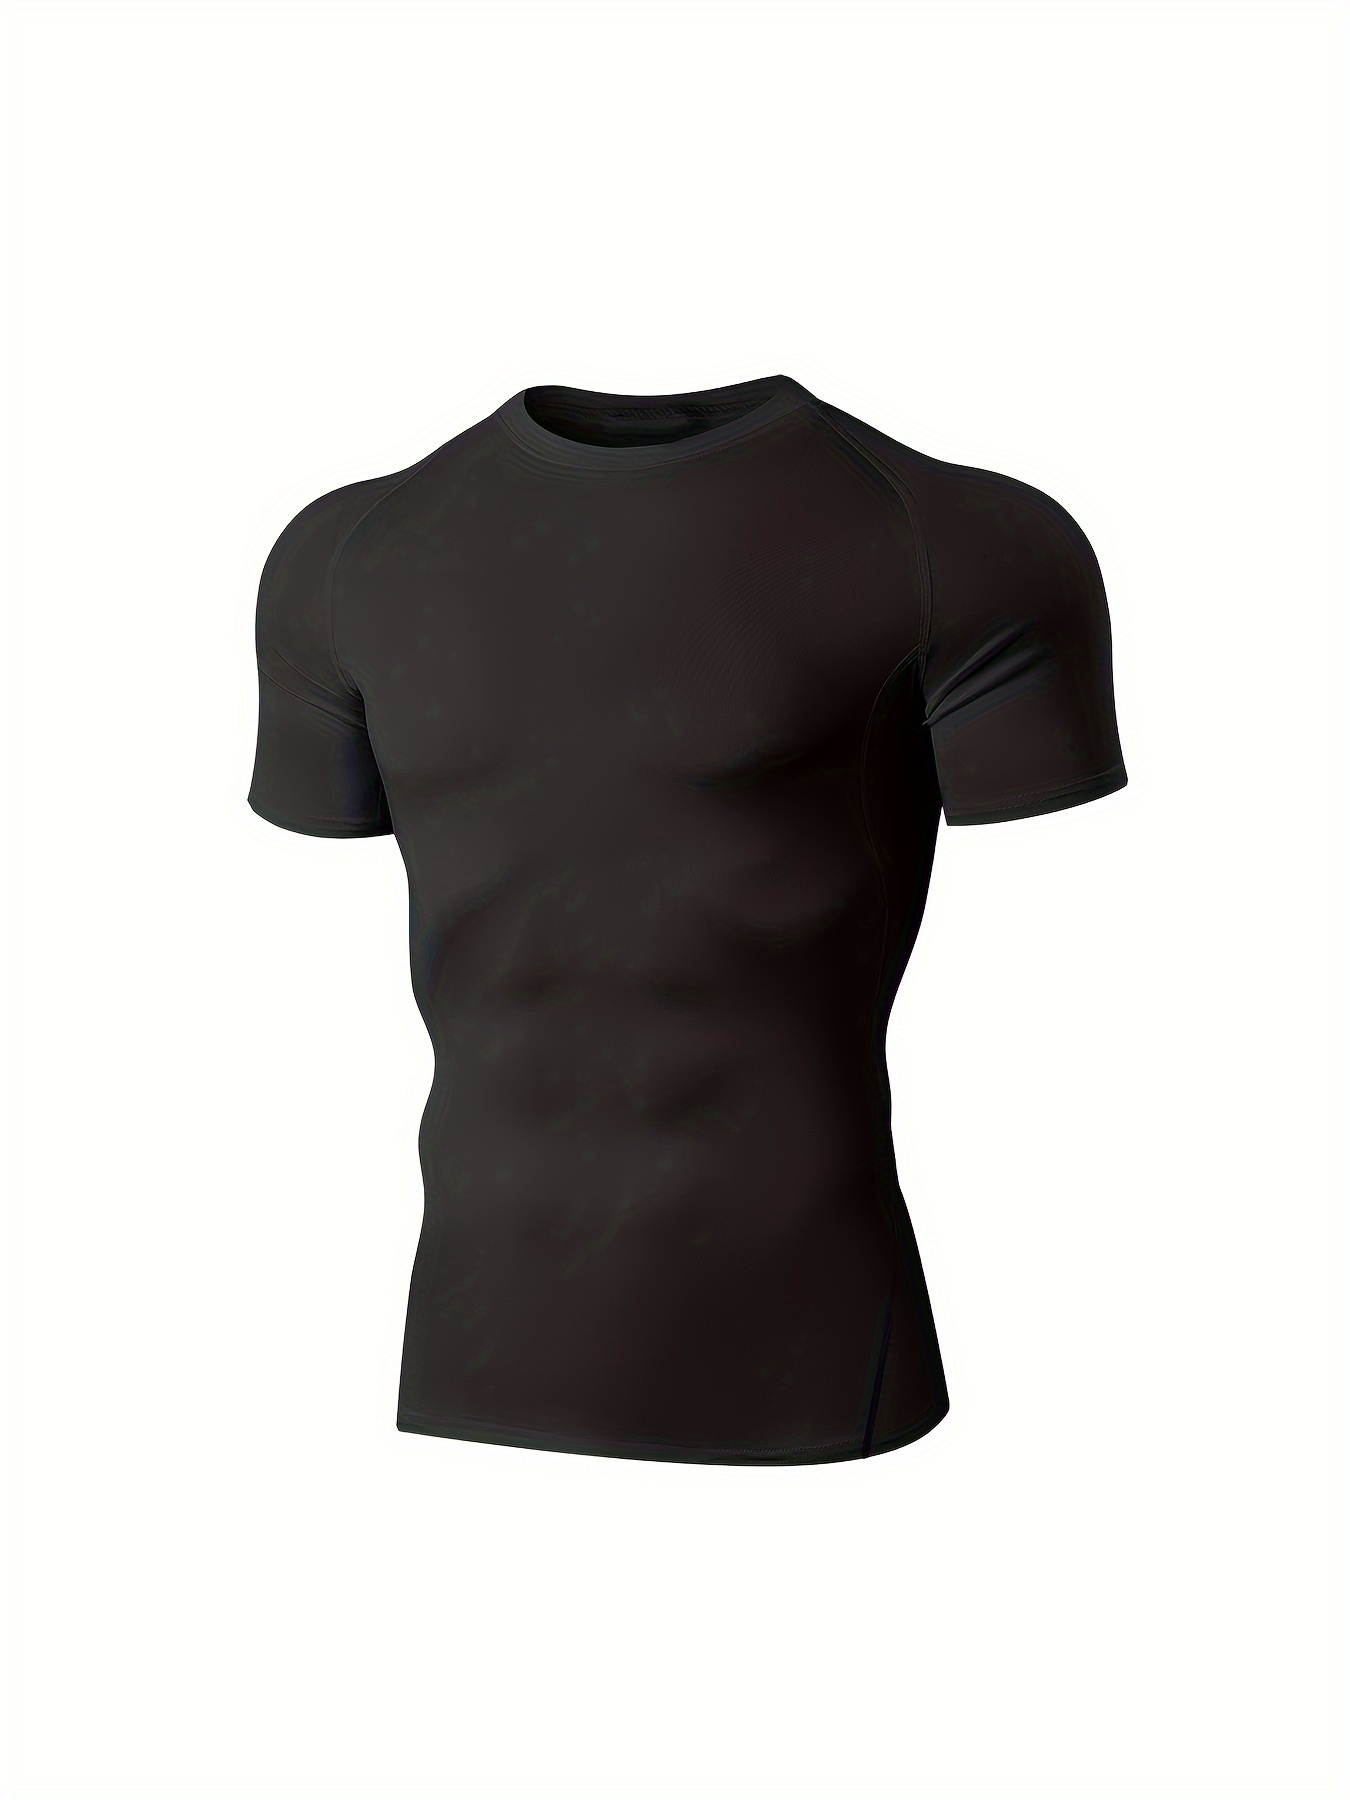 Factory Hot Selling 2PCS Compression Short Sleeve T-Shirt with Gym